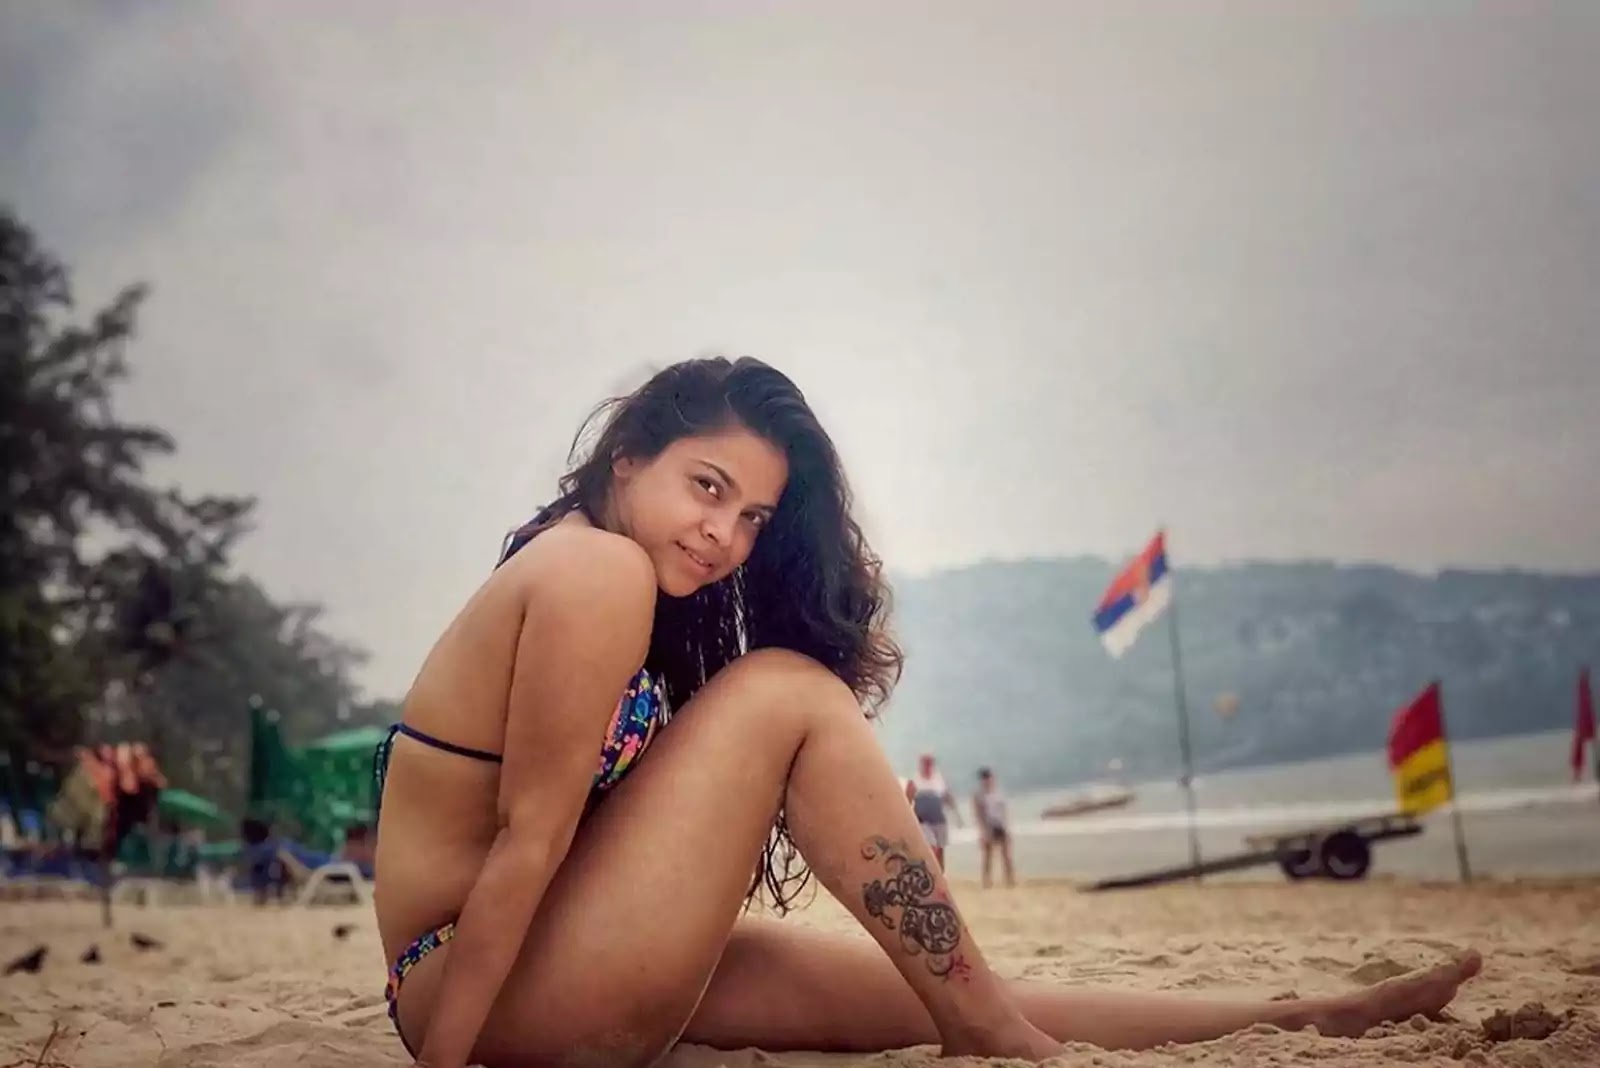 Sumona Chakravarty's hot avatar seen on the seashore, fans go crazy after seeing the photo